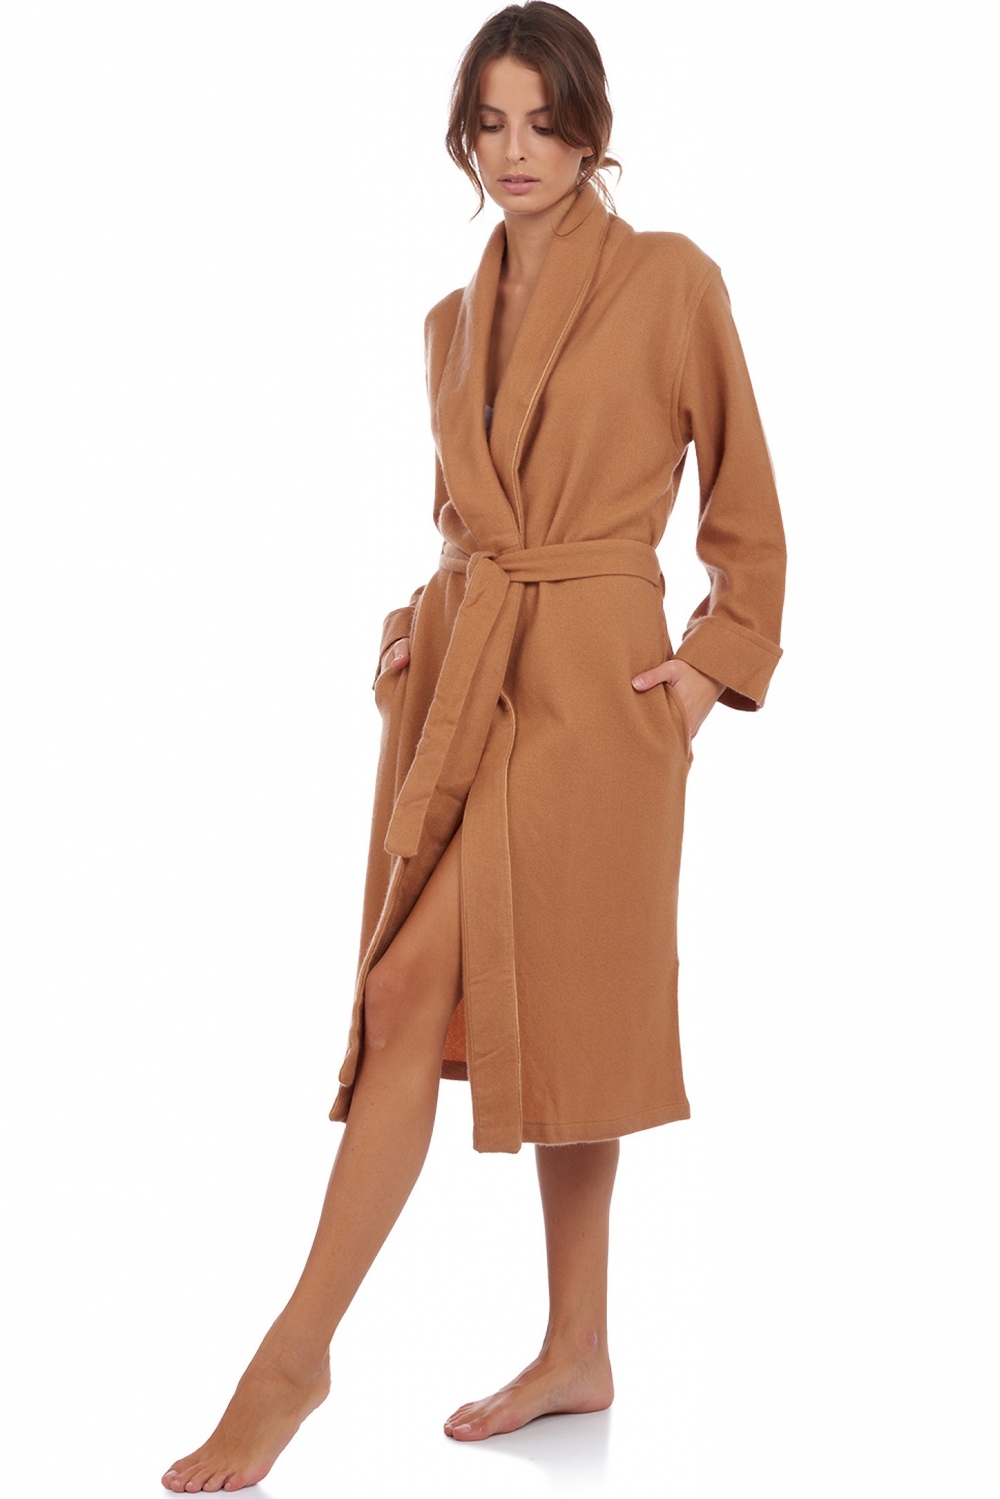 Cashmere accessories cocooning mylady camel desert s4